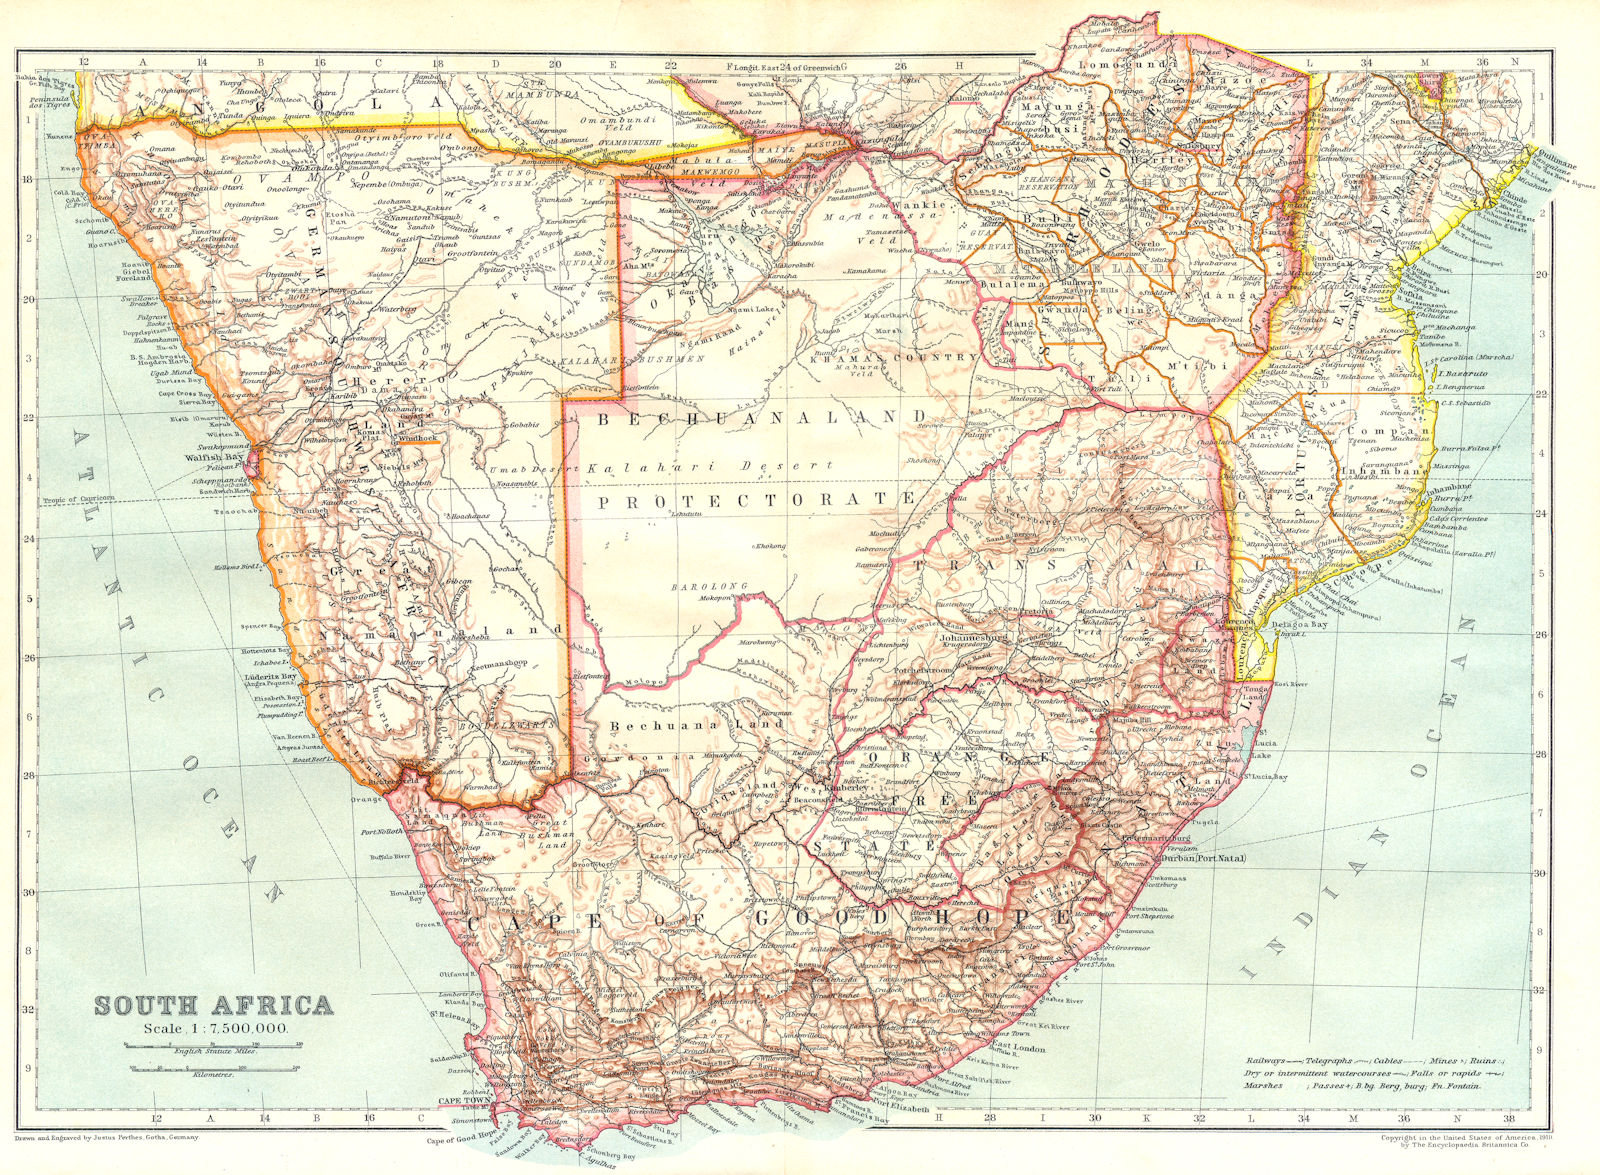 SOUTHERN AFRICA. South Africa Namibia Botswana Mozambique Rhodesia 1910 map